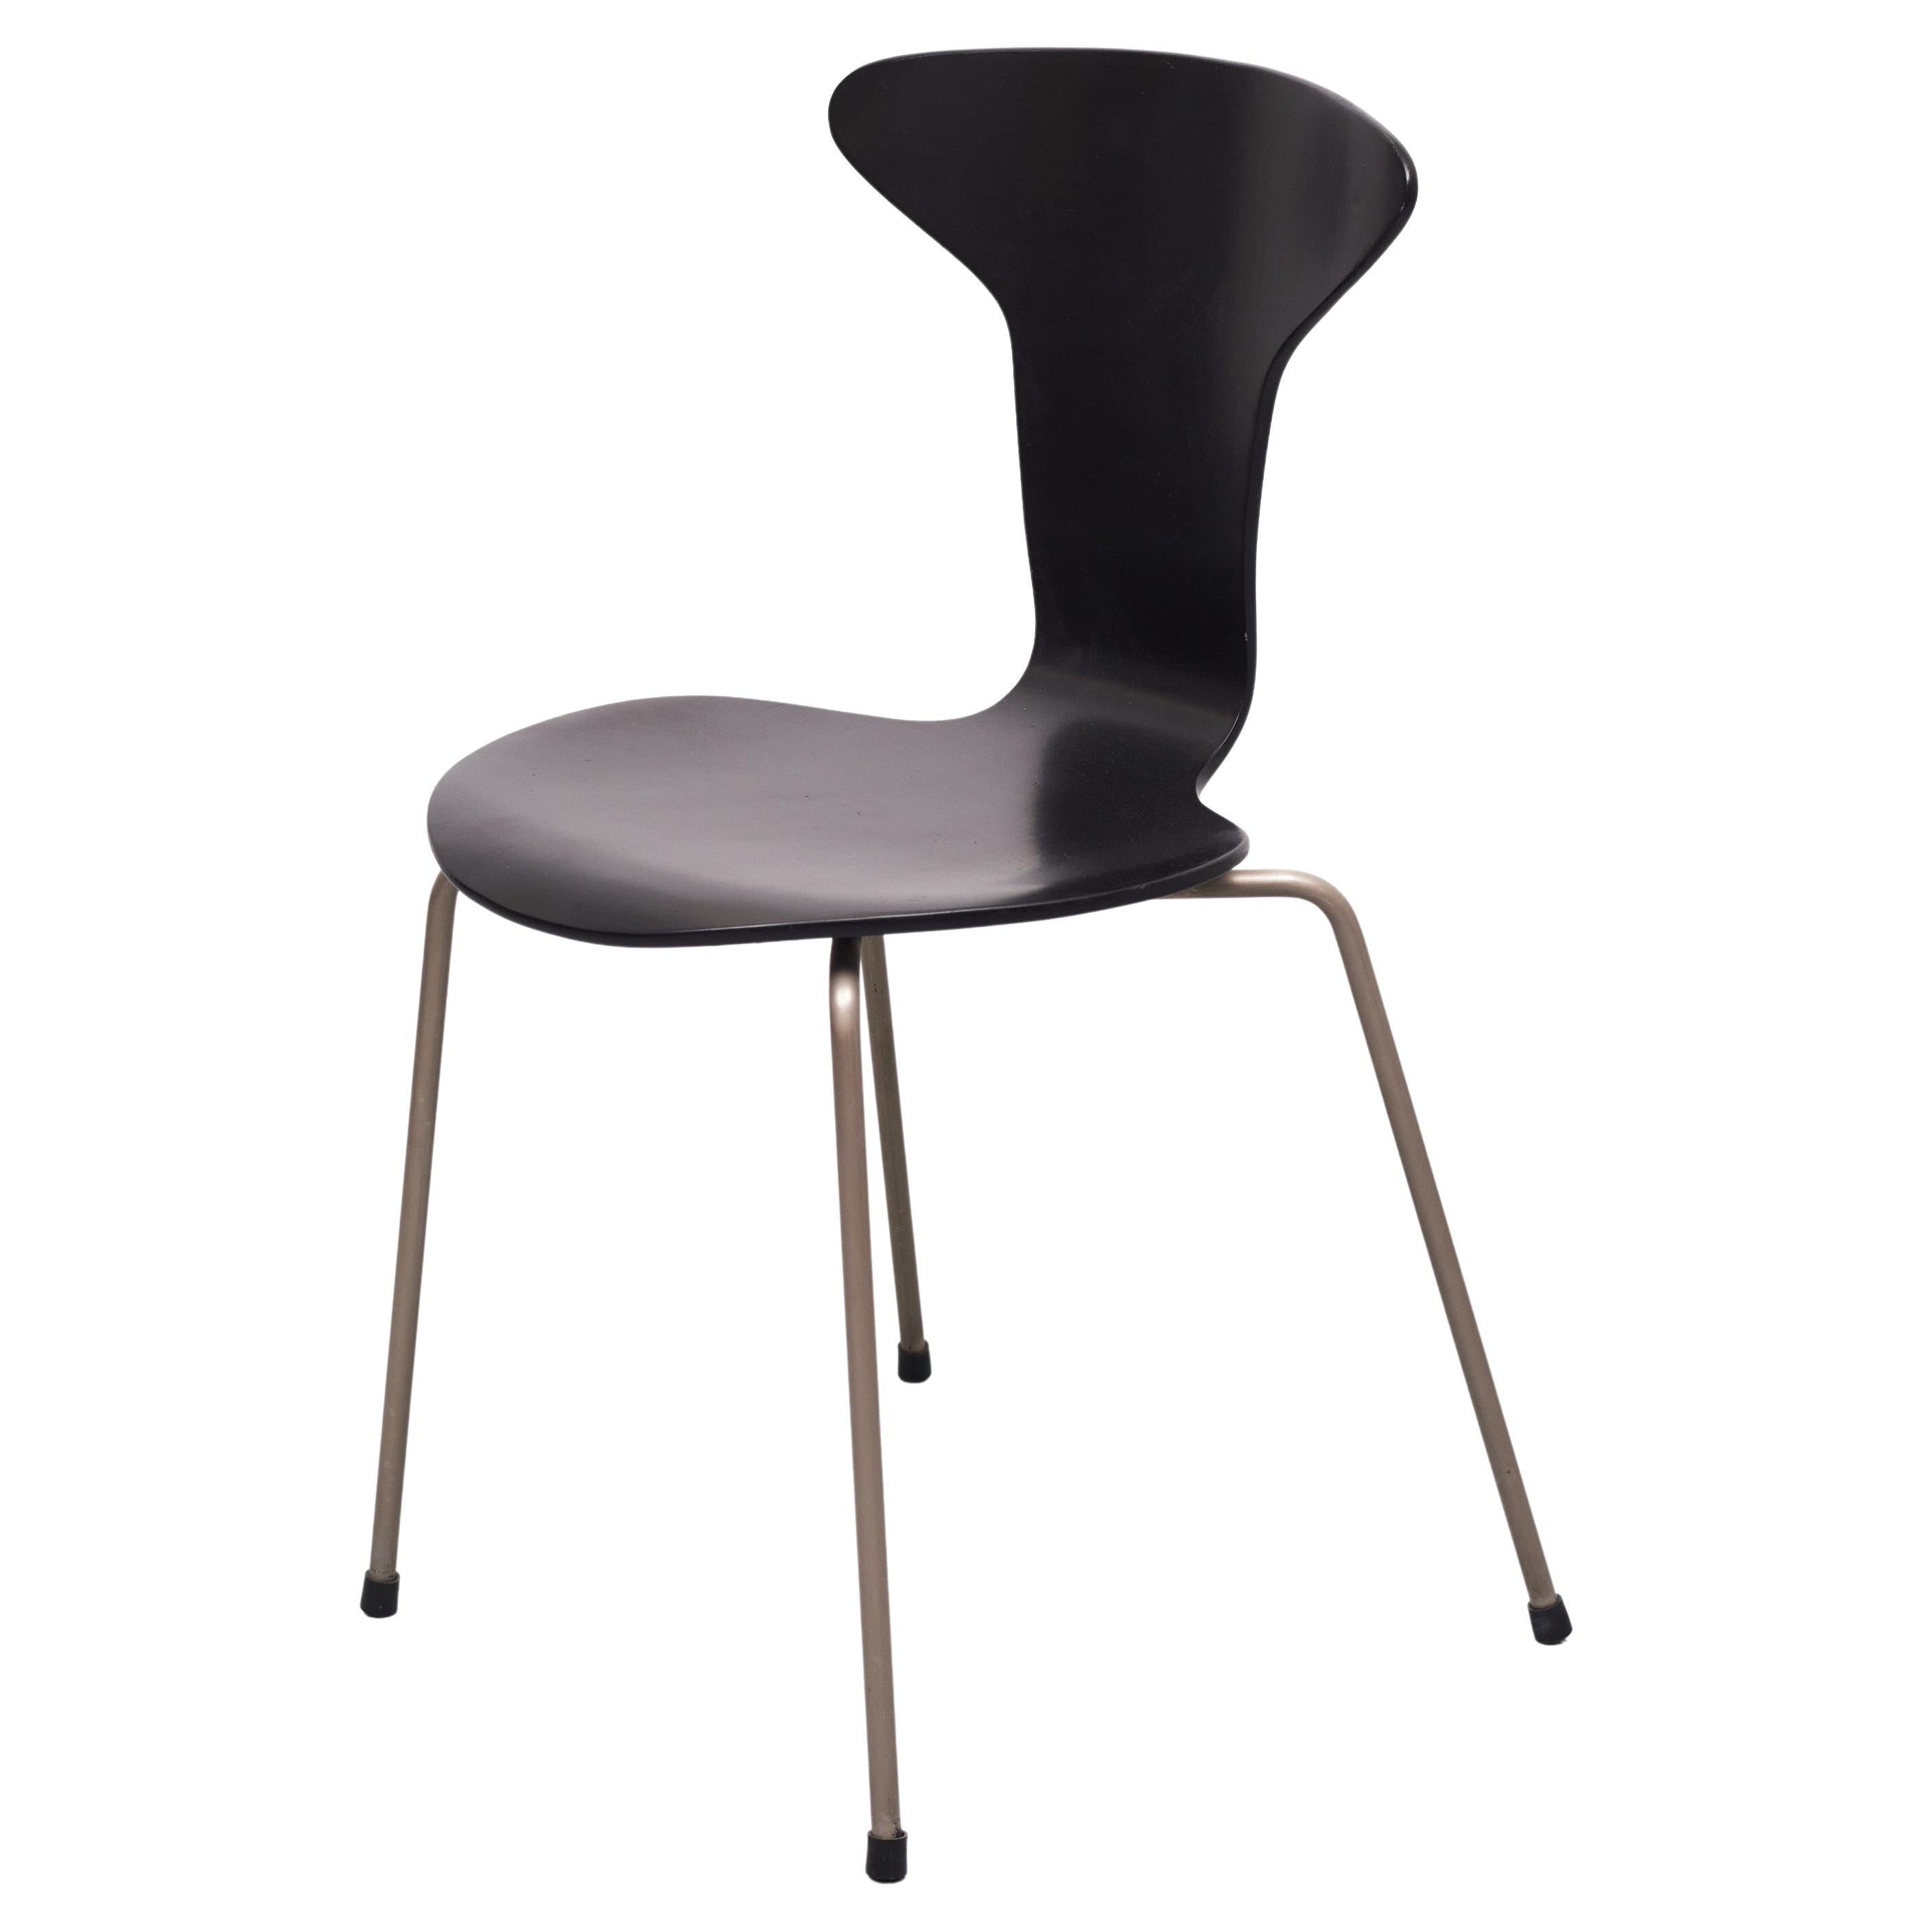 These very first model 3105 chairs were designed in 1955 by Arne Jacobsen for Fritz Hansen. They are also known as the Mosquito or Munkegaard chair, a true classic of Danish design. This chair is vintage but in good condition, with no sign of